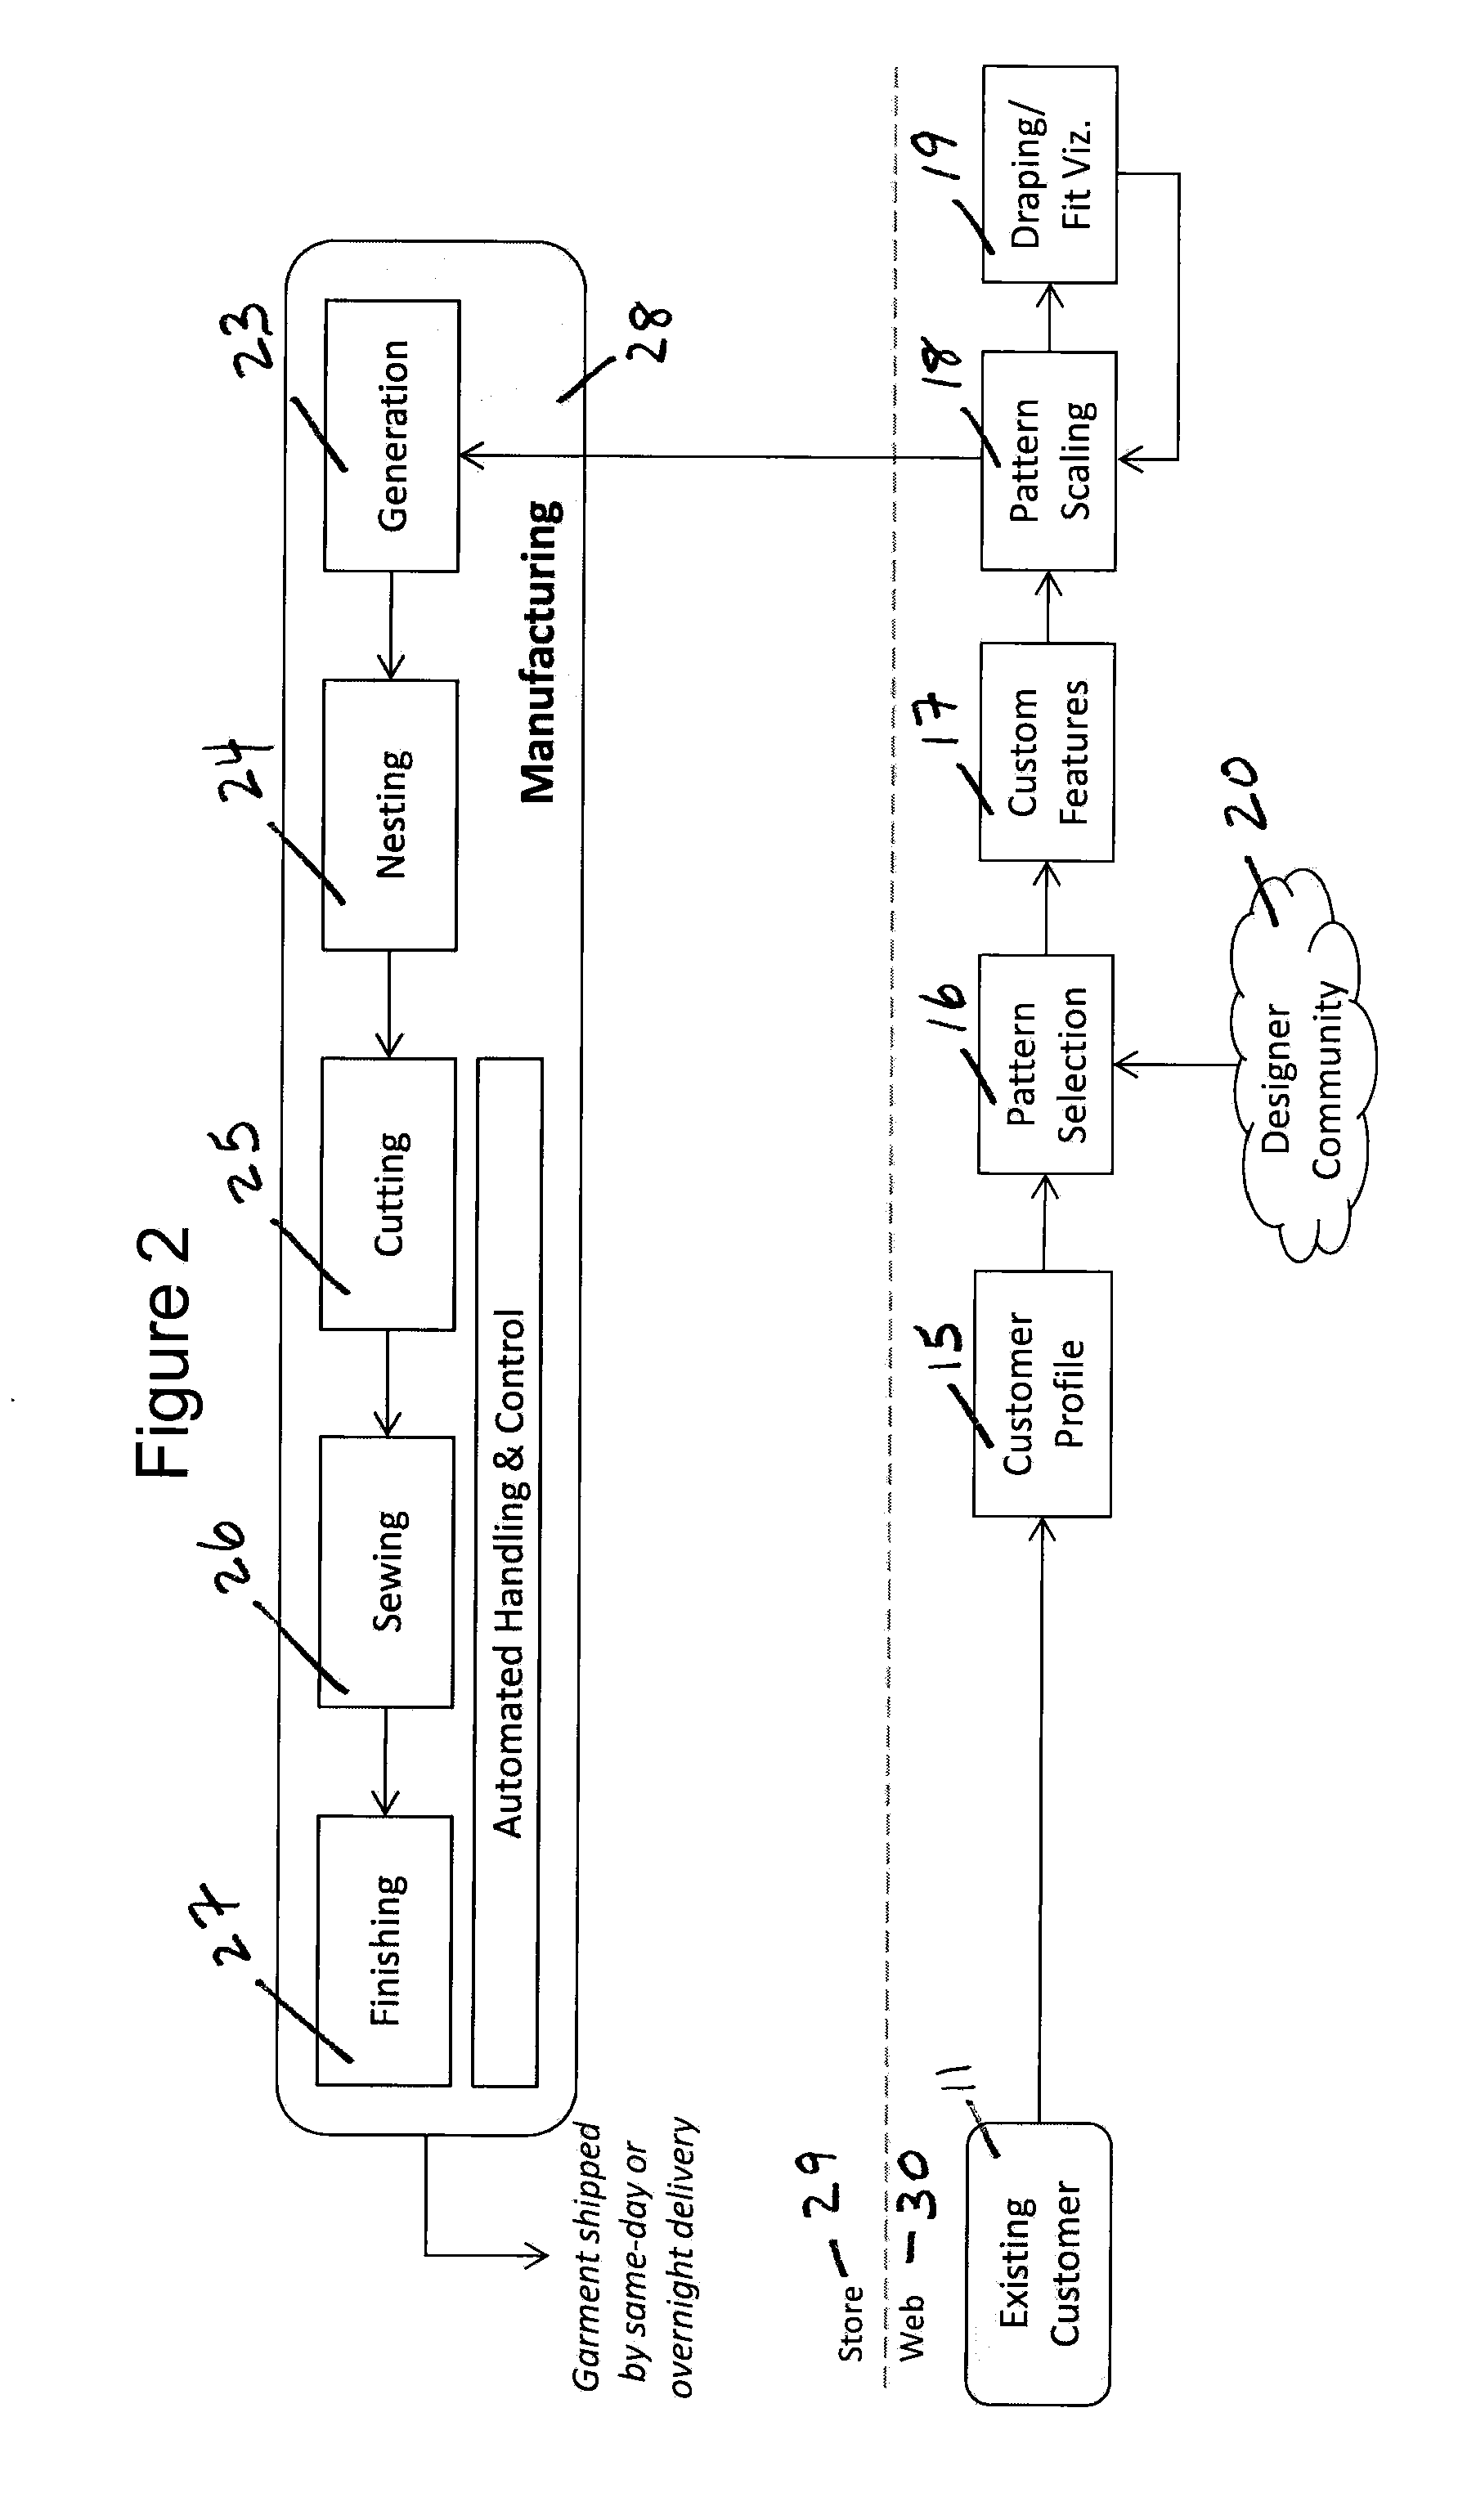 System and Method for Automated Manufacturing of Custom Apparel